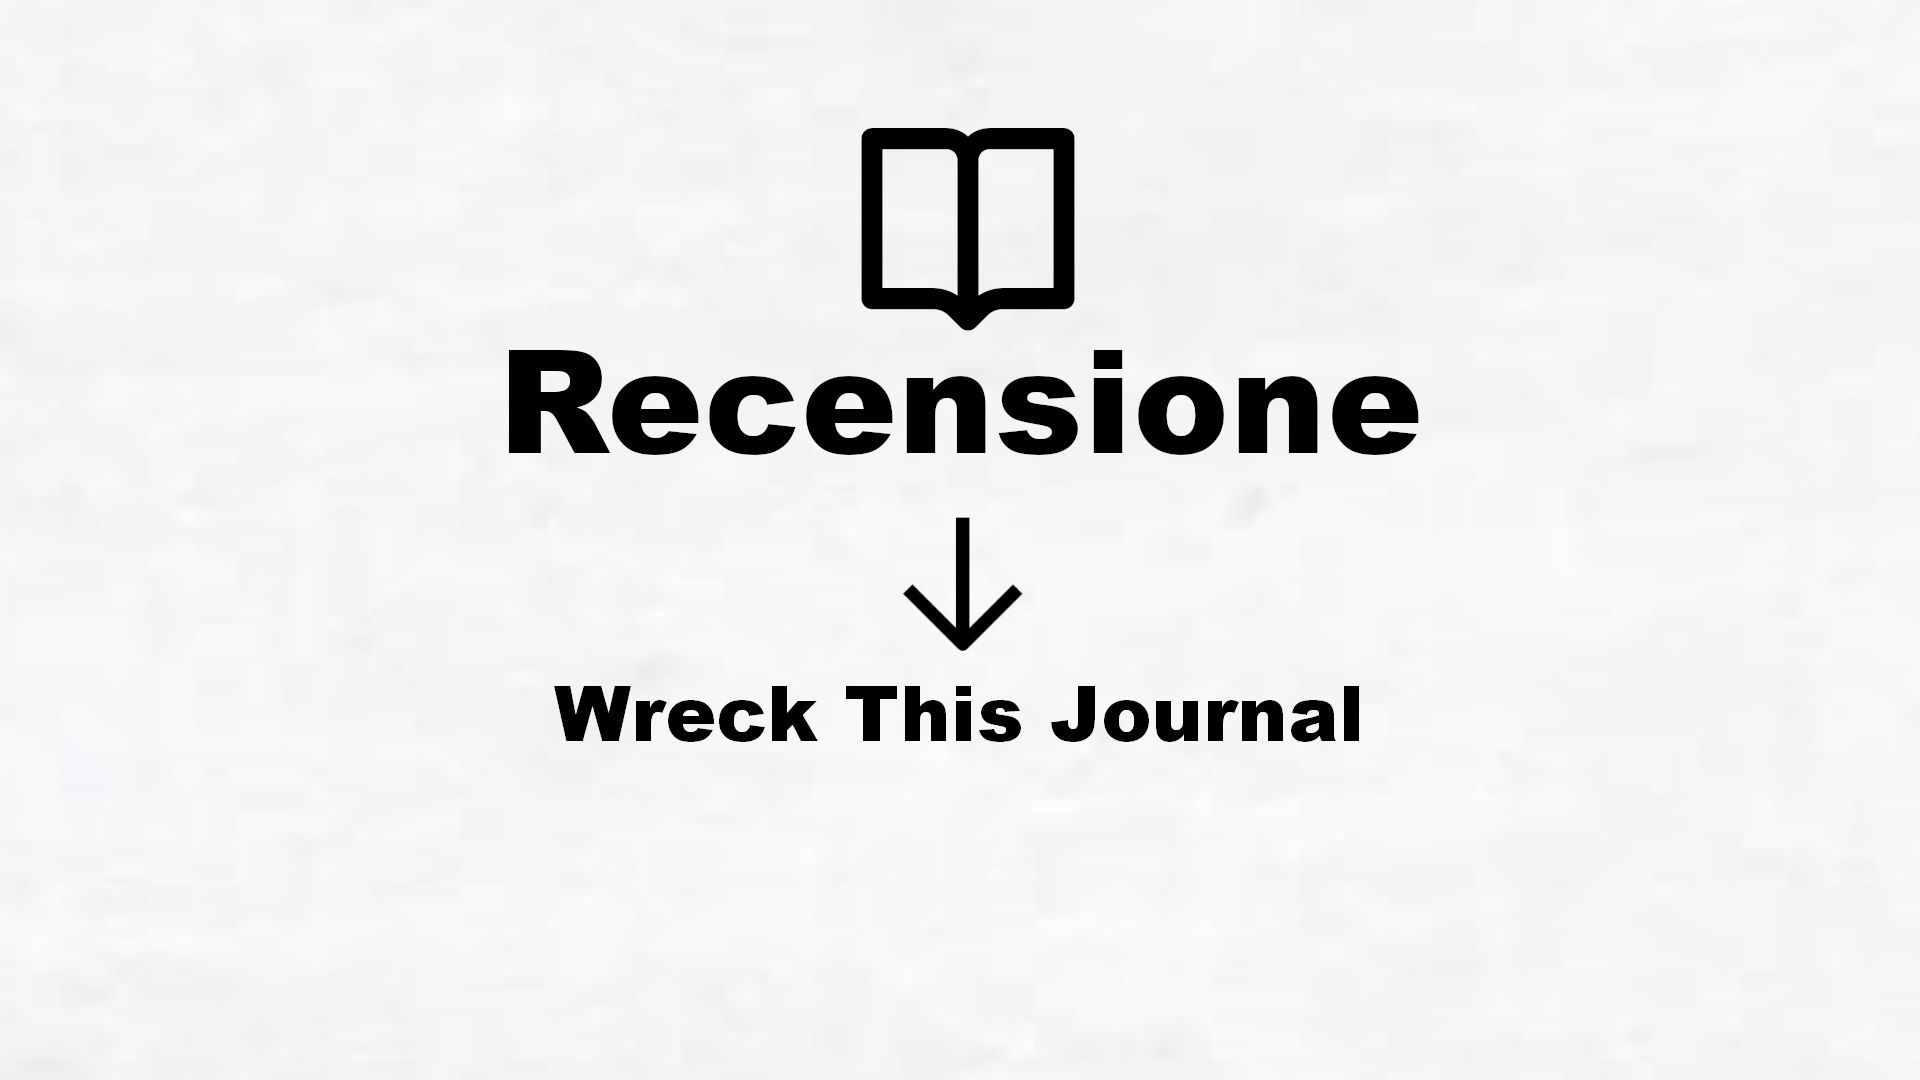 Wreck This Journal – Recensione Libro